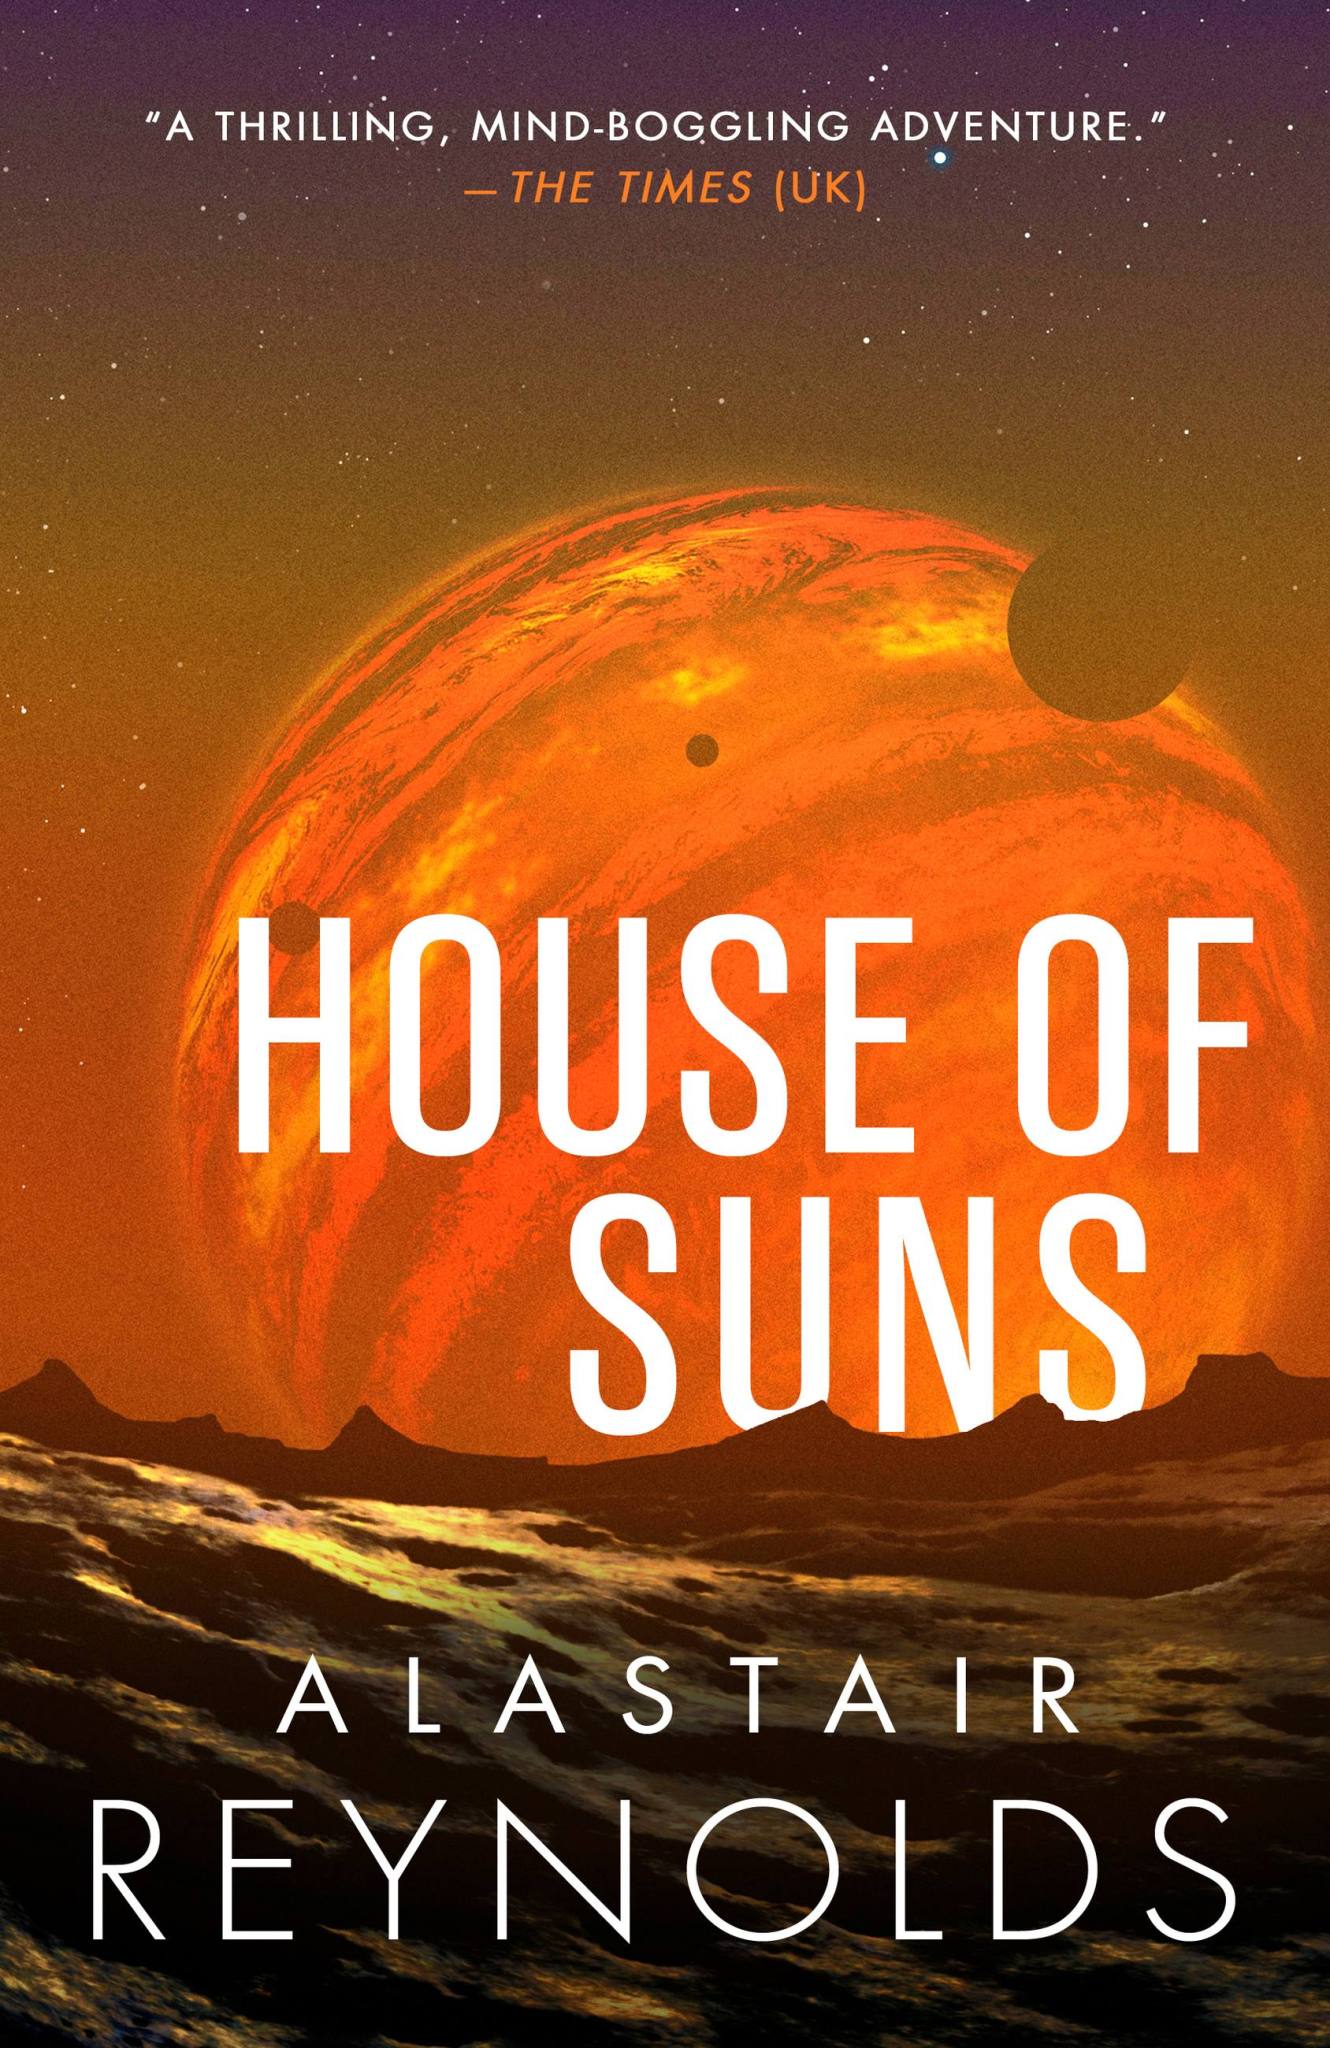 Book cover of House of Suns.